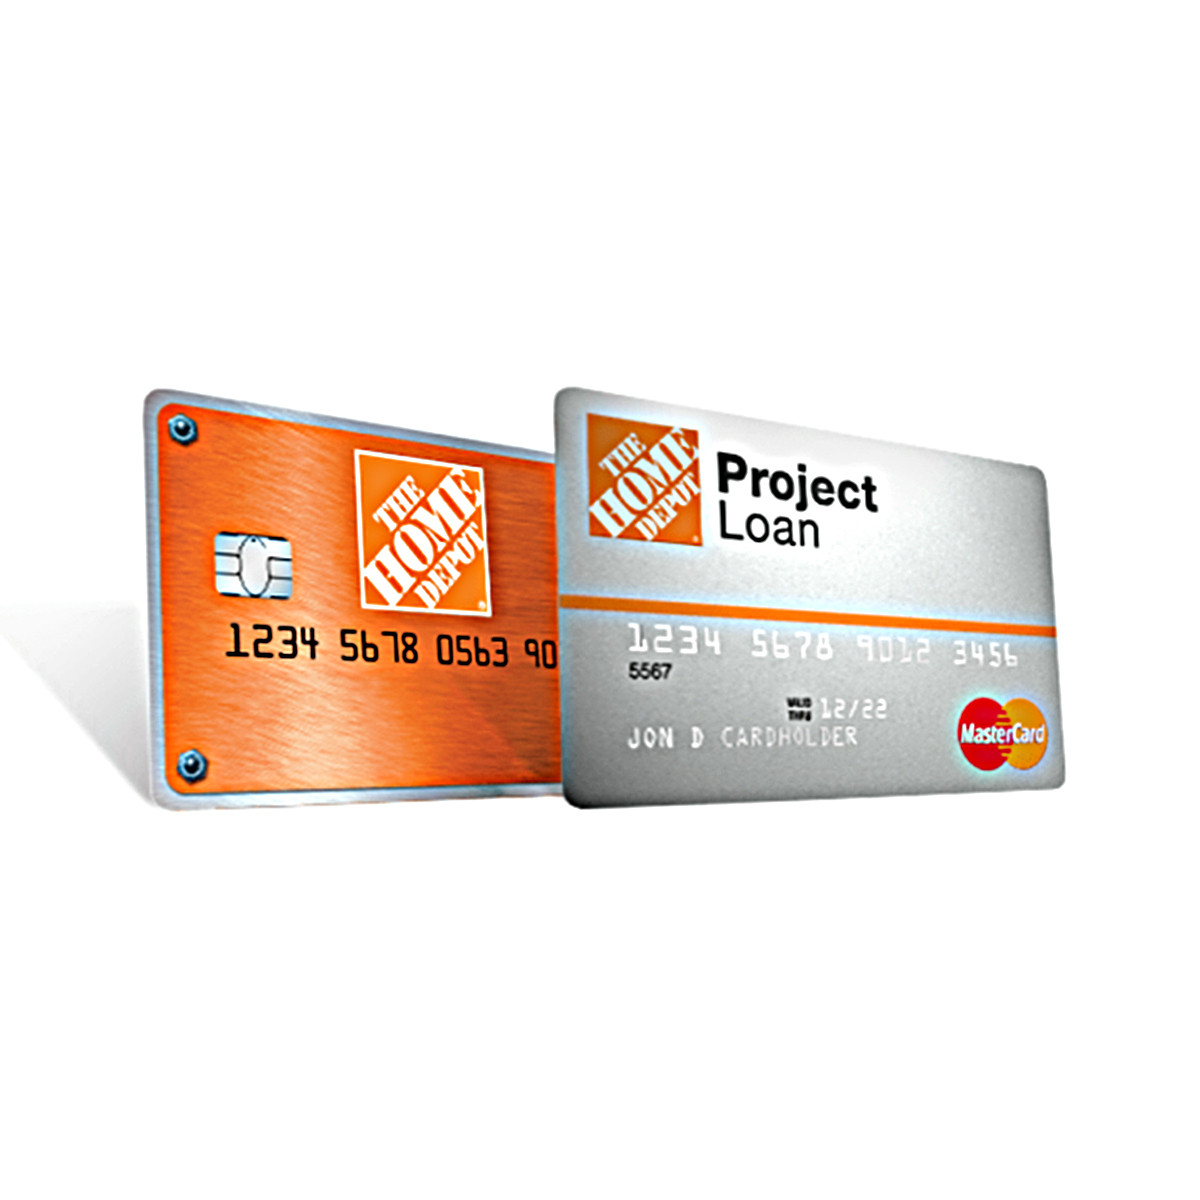 Which Card Home Improvement Credit Card Is Easy To Qualify For Home Depot Or Sears